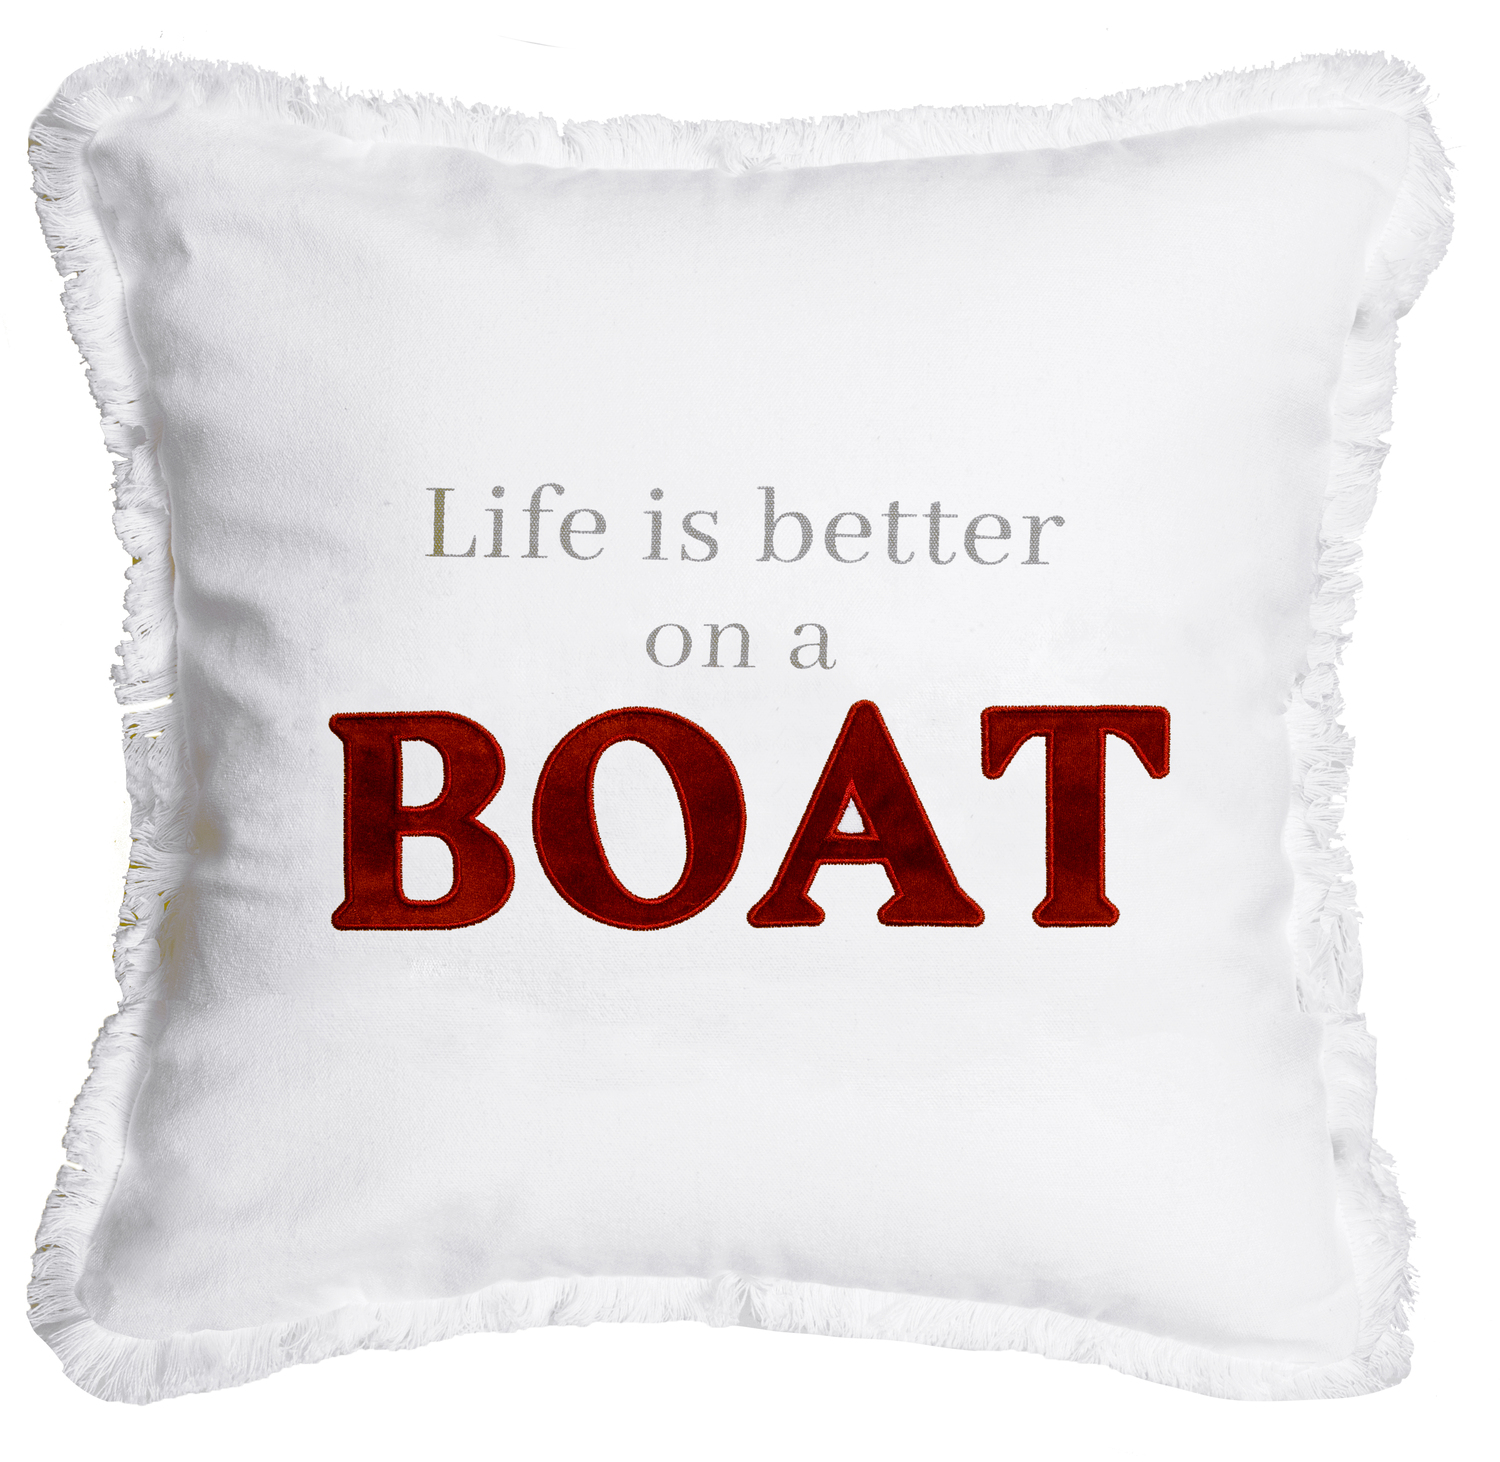 Boat by Tossing Words Around - Boat - 18" Throw Pillow Cover